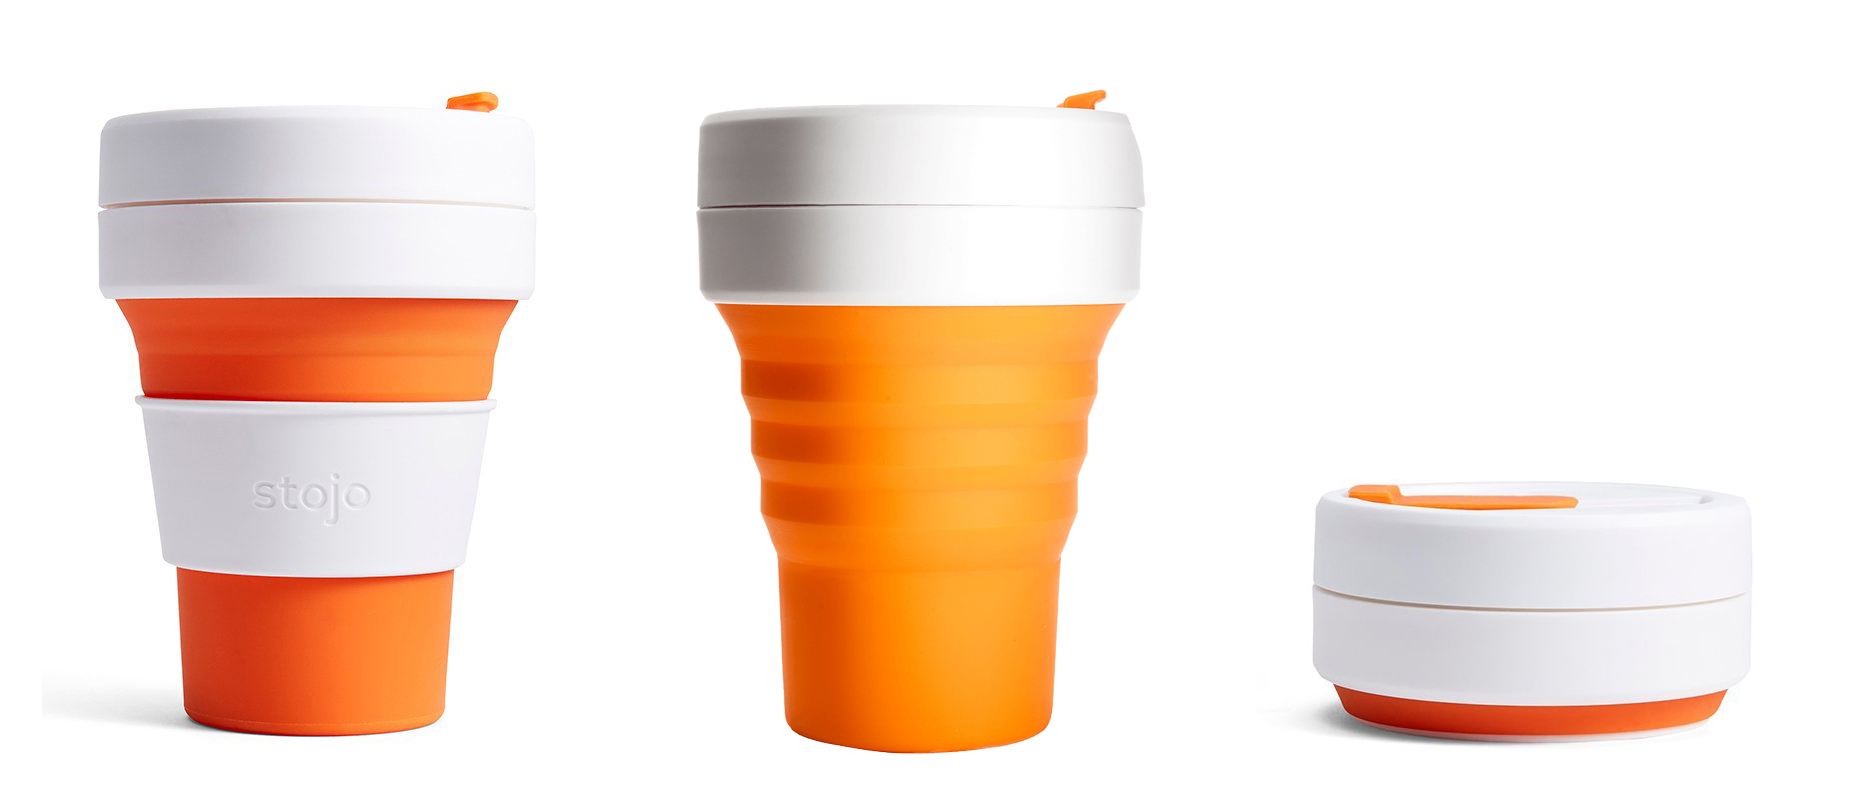 Stojo collapsible cup